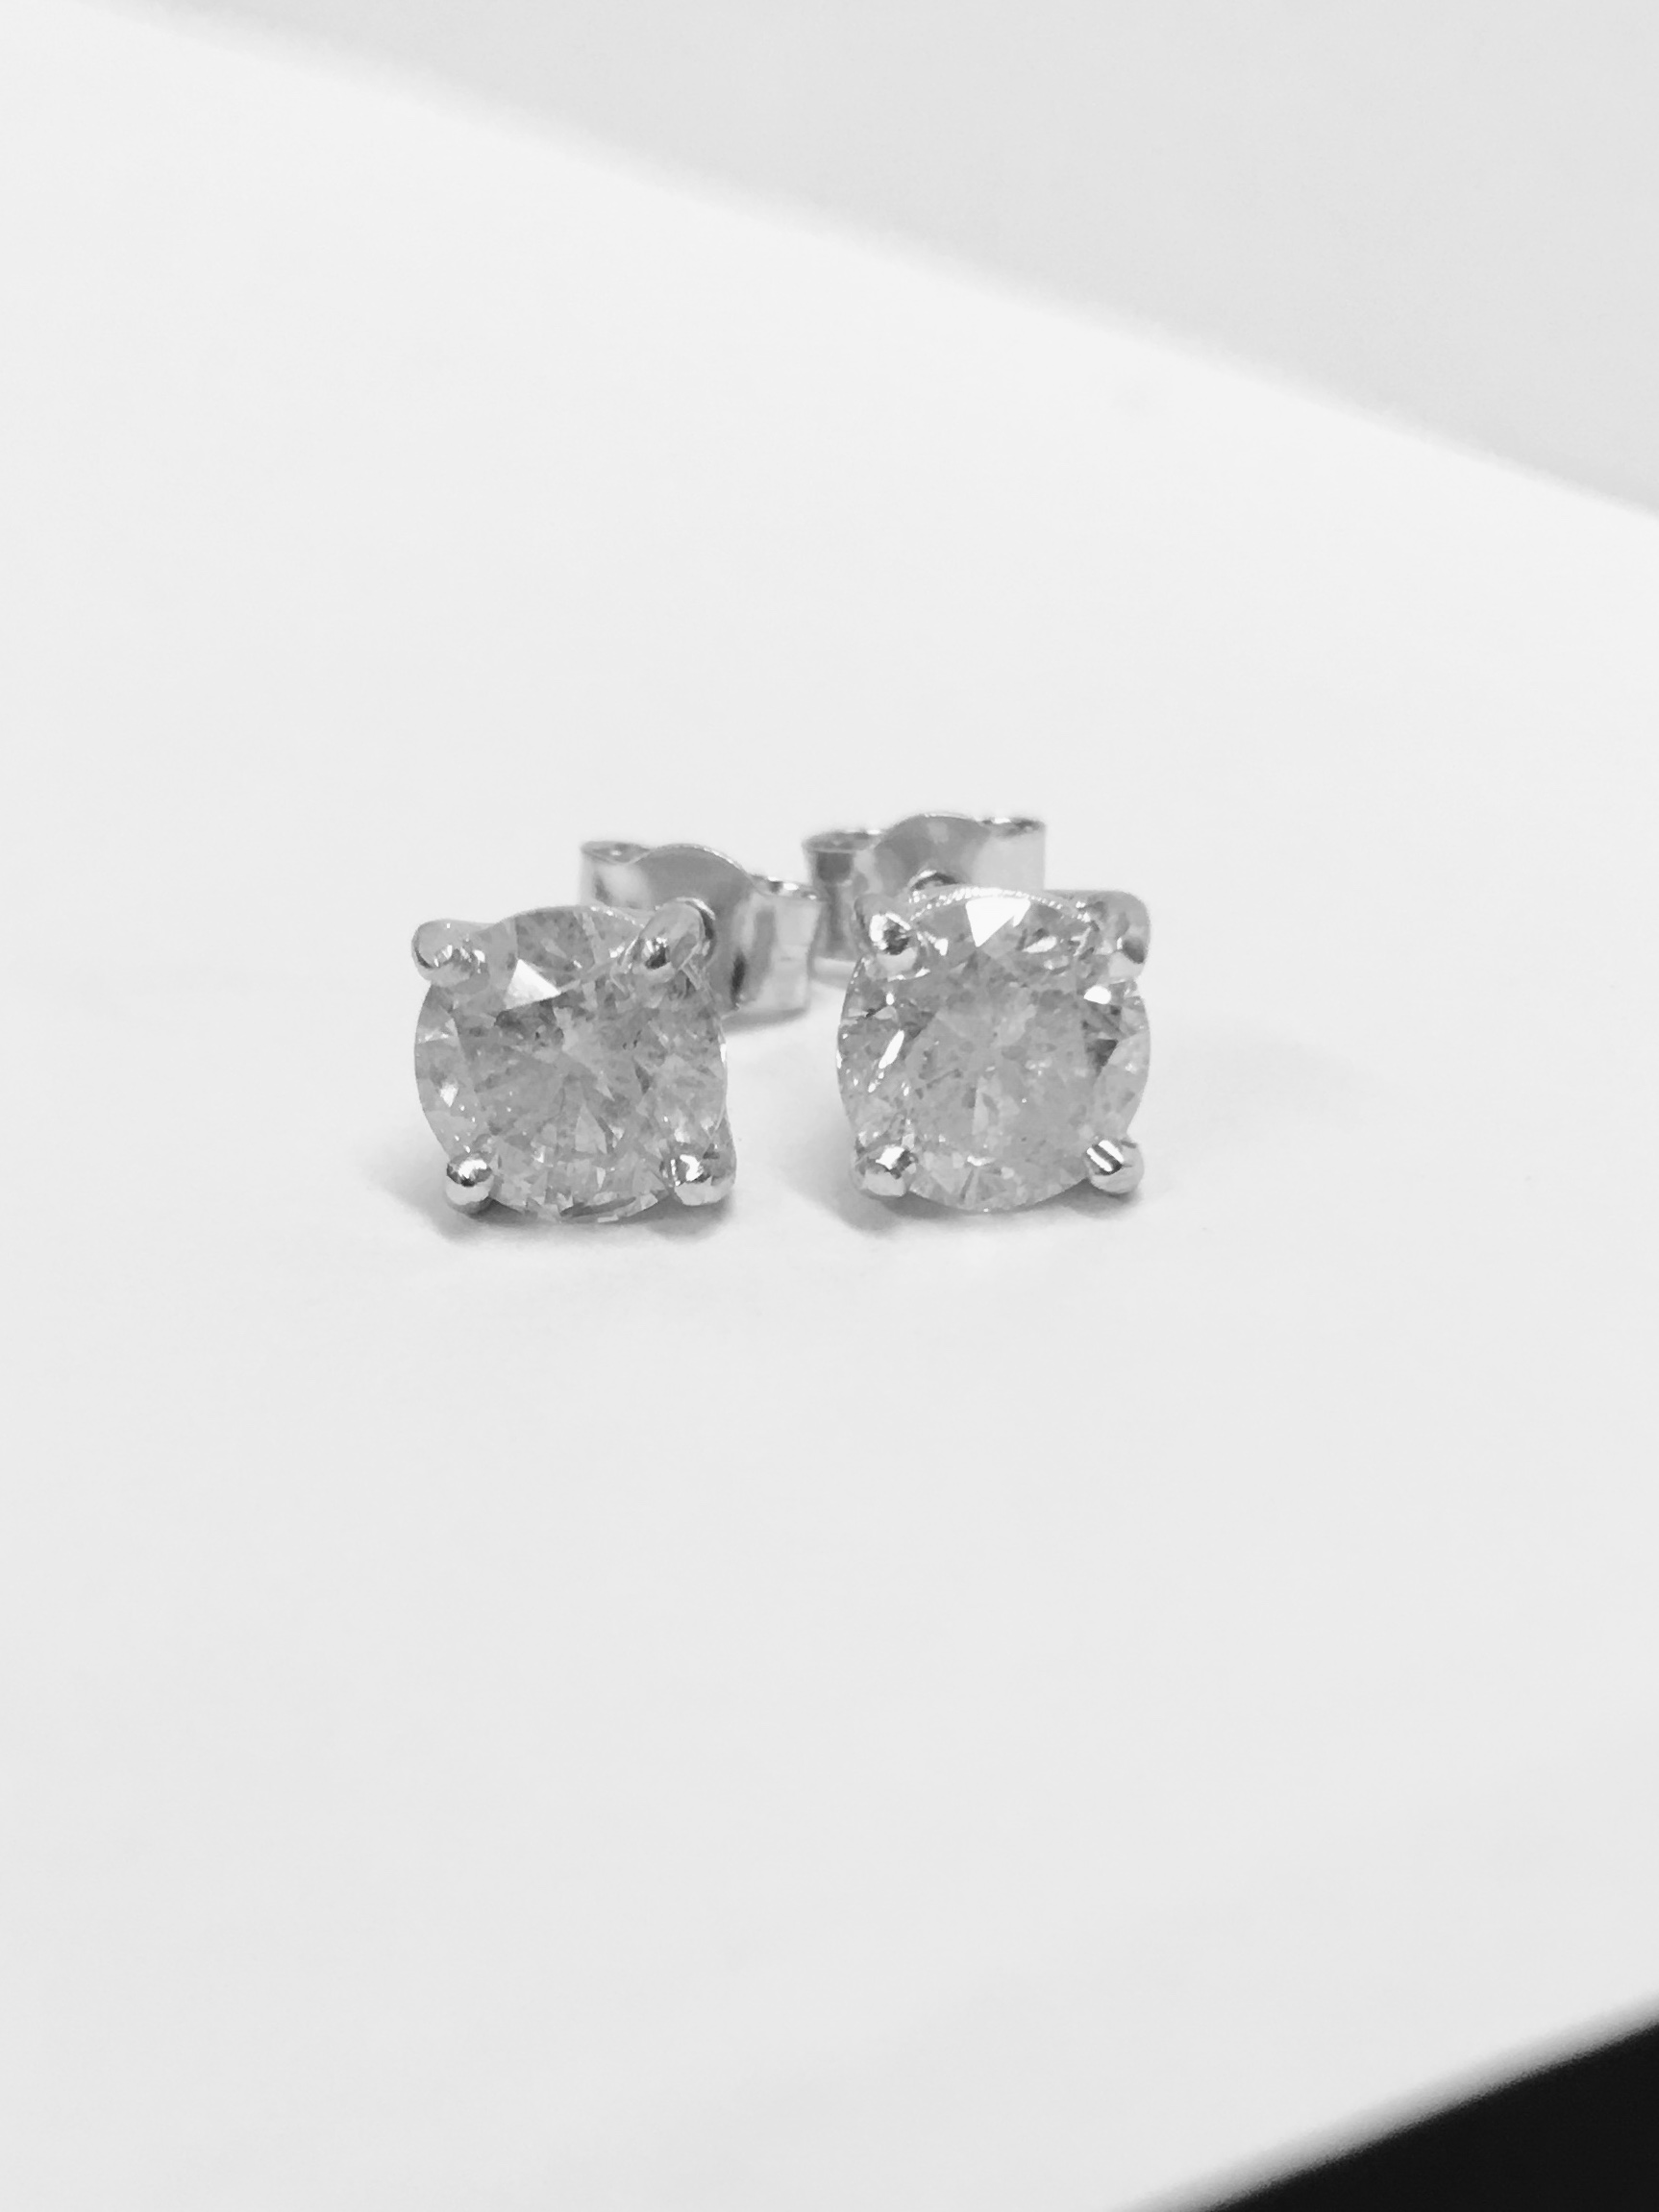 1ct diamond solitaire earrings - Image 11 of 24